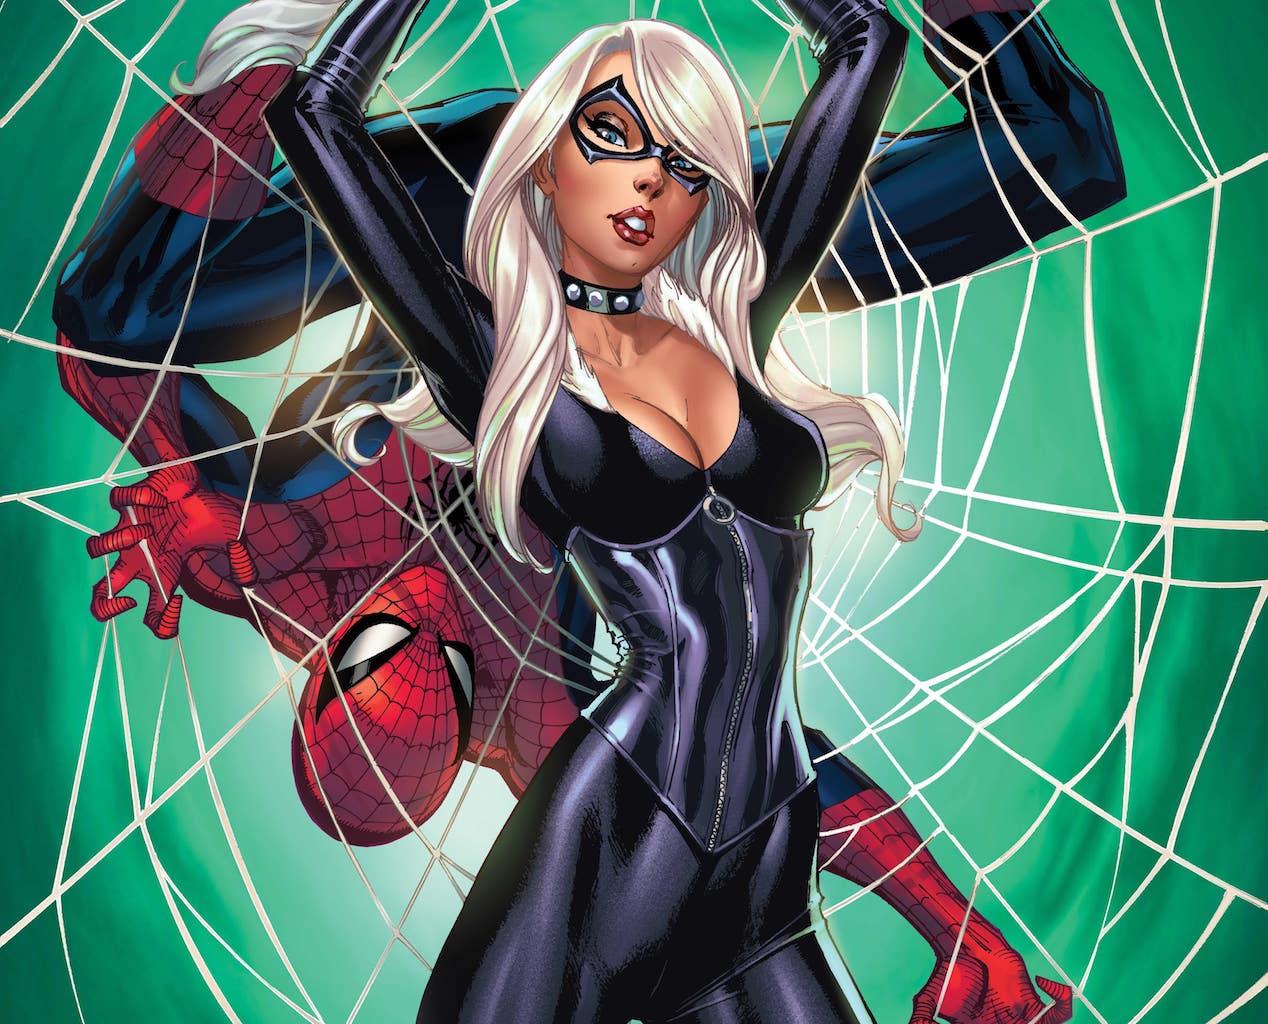 Spider-Man gets real and intimate with Black Cat in Amazing Spider-Man #10